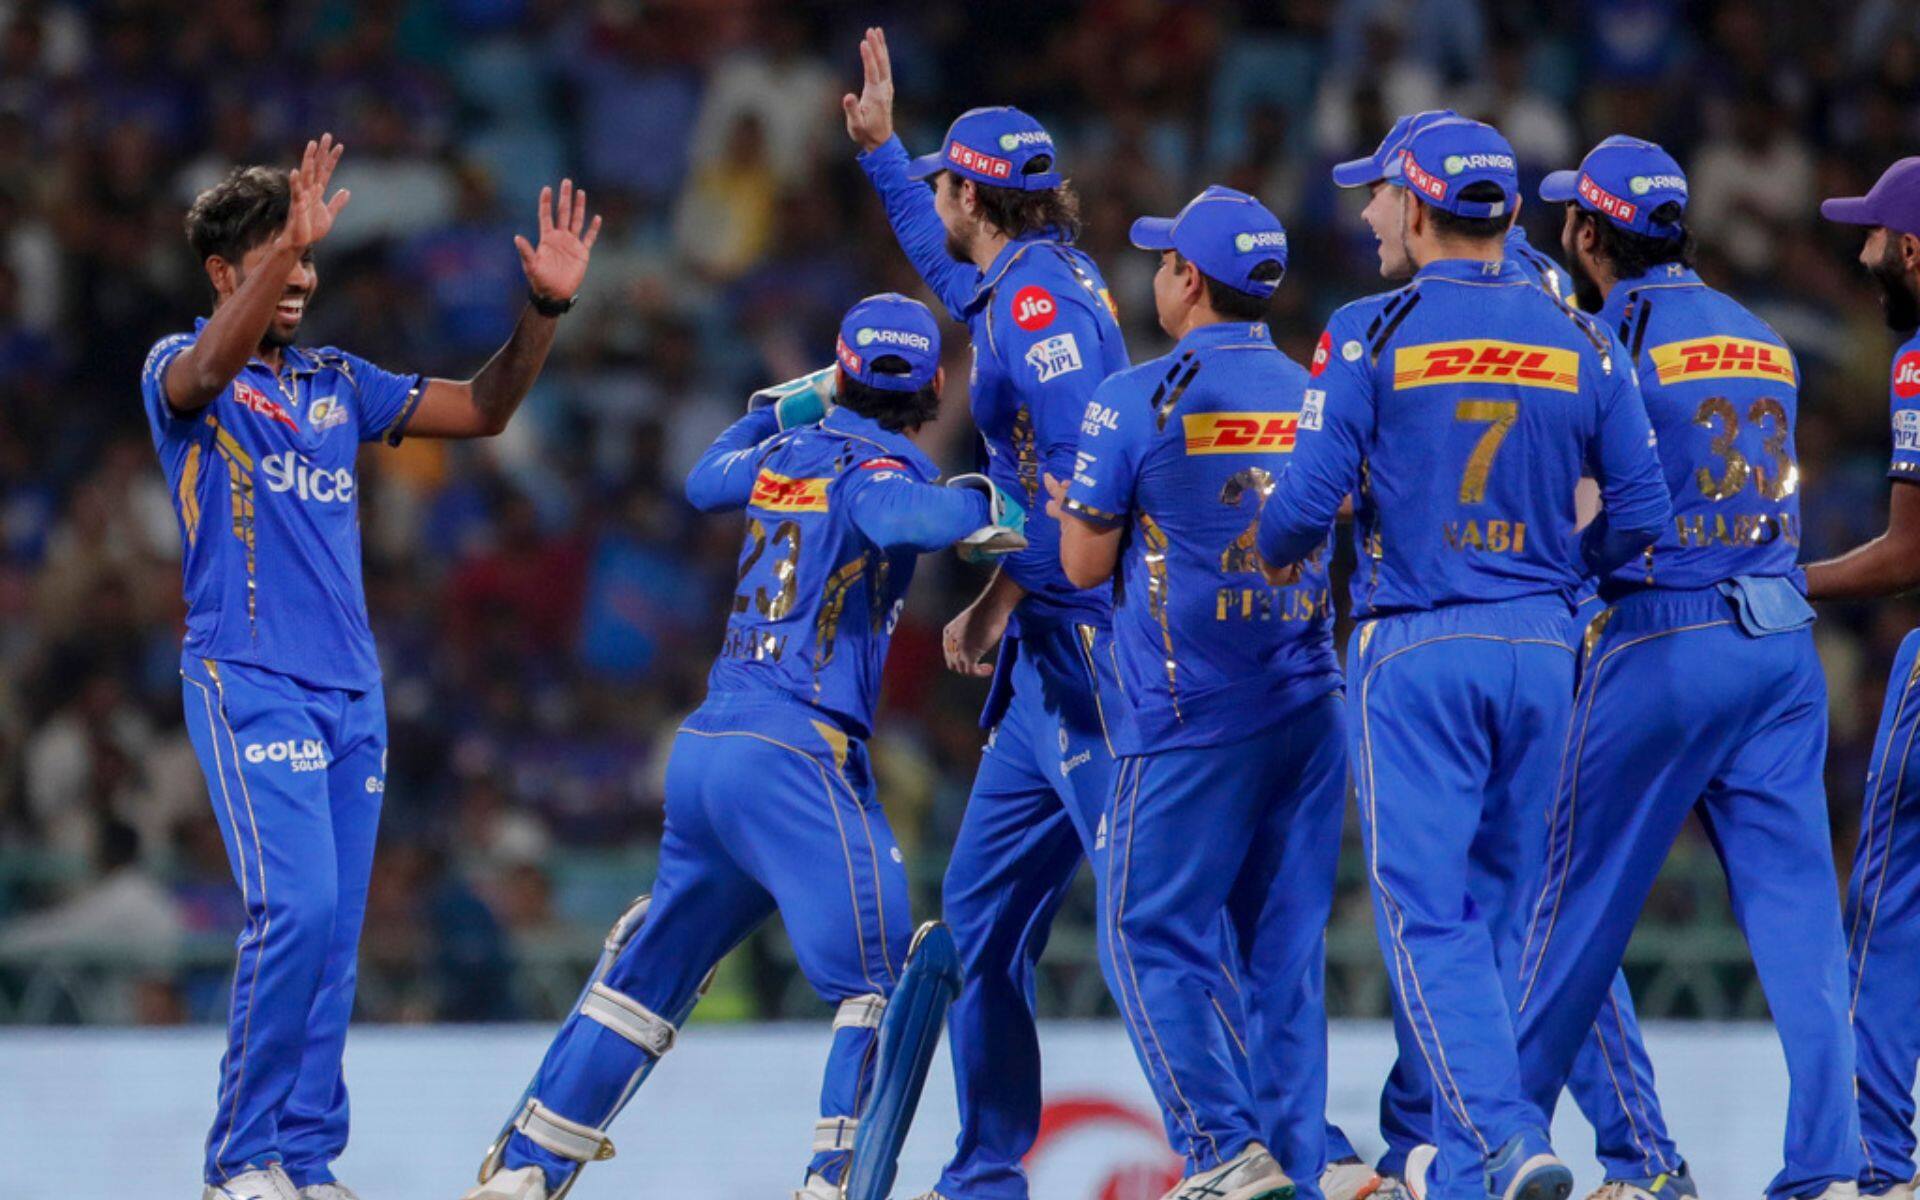 MI players celebrating after a wicket (AP Photo)